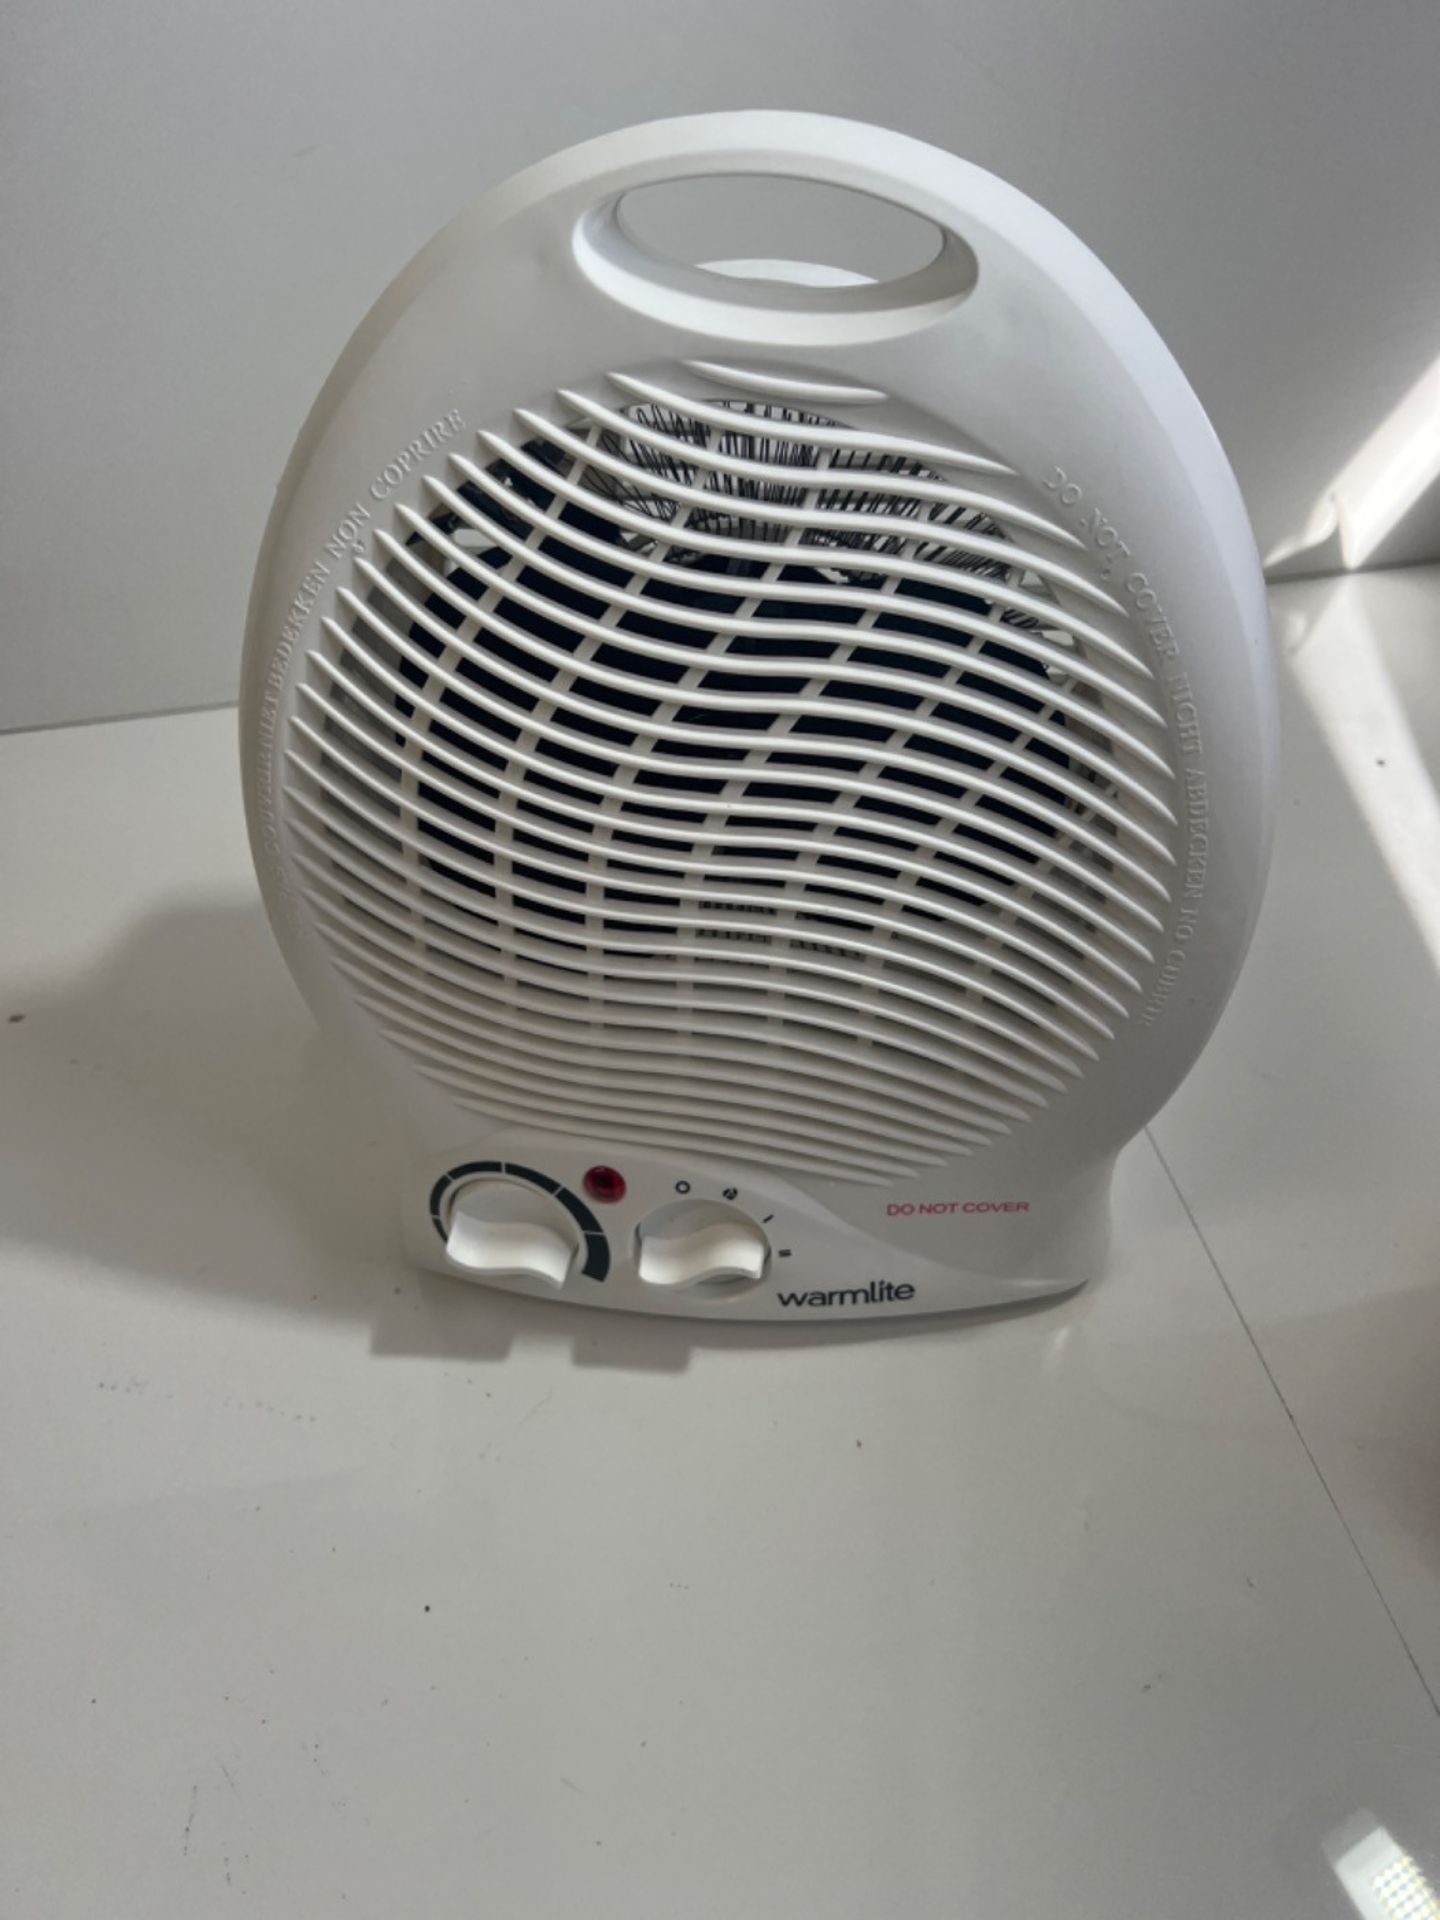 Warmlite WL44002 Thermo Fan Heater with 2 Heat Settings and Overheat Protection, 2000W, White - Image 3 of 3